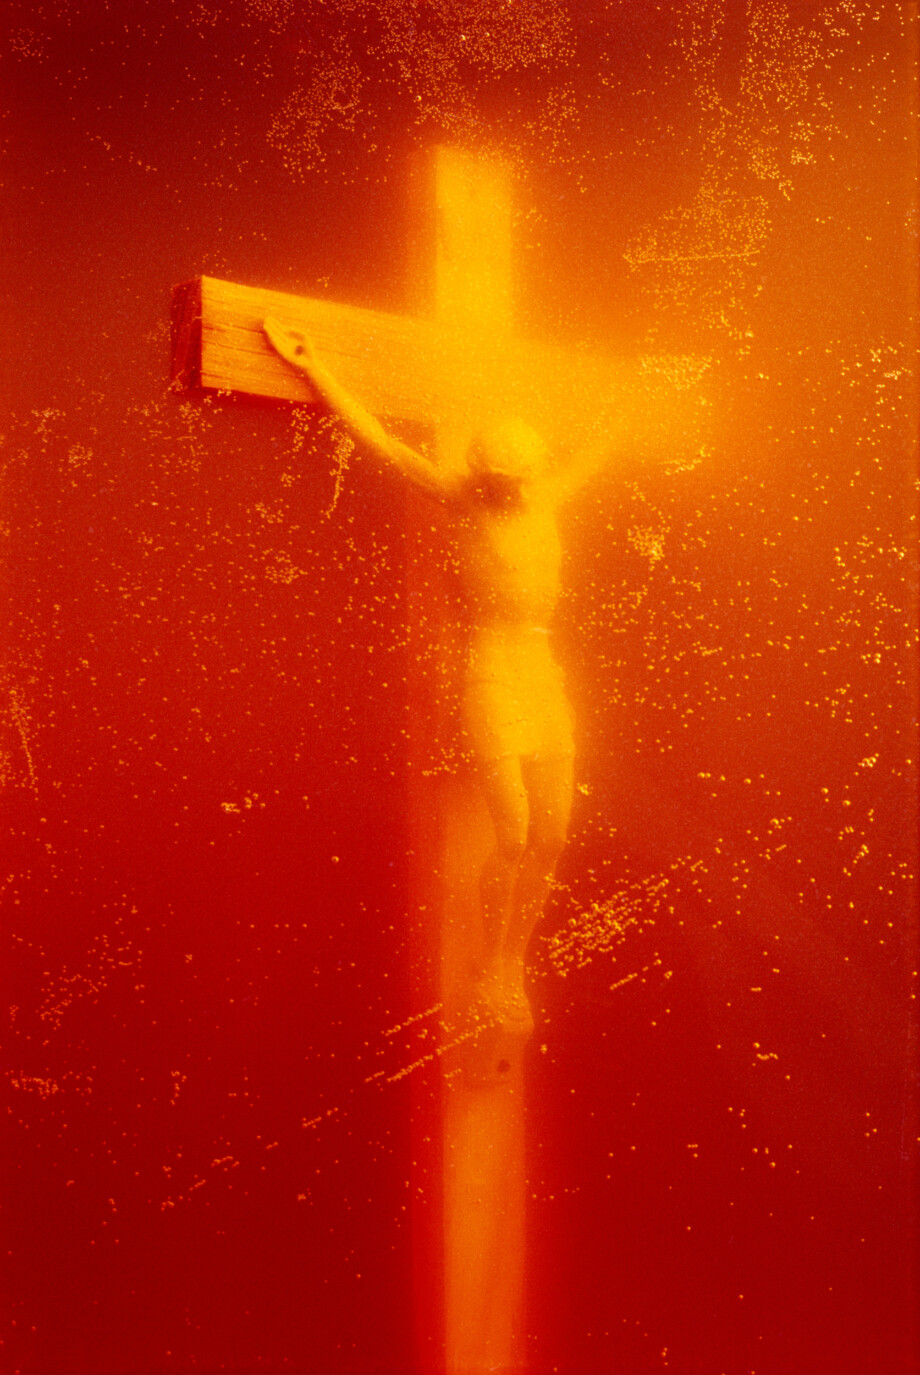 Piss Christ by artist Andres Serrano.